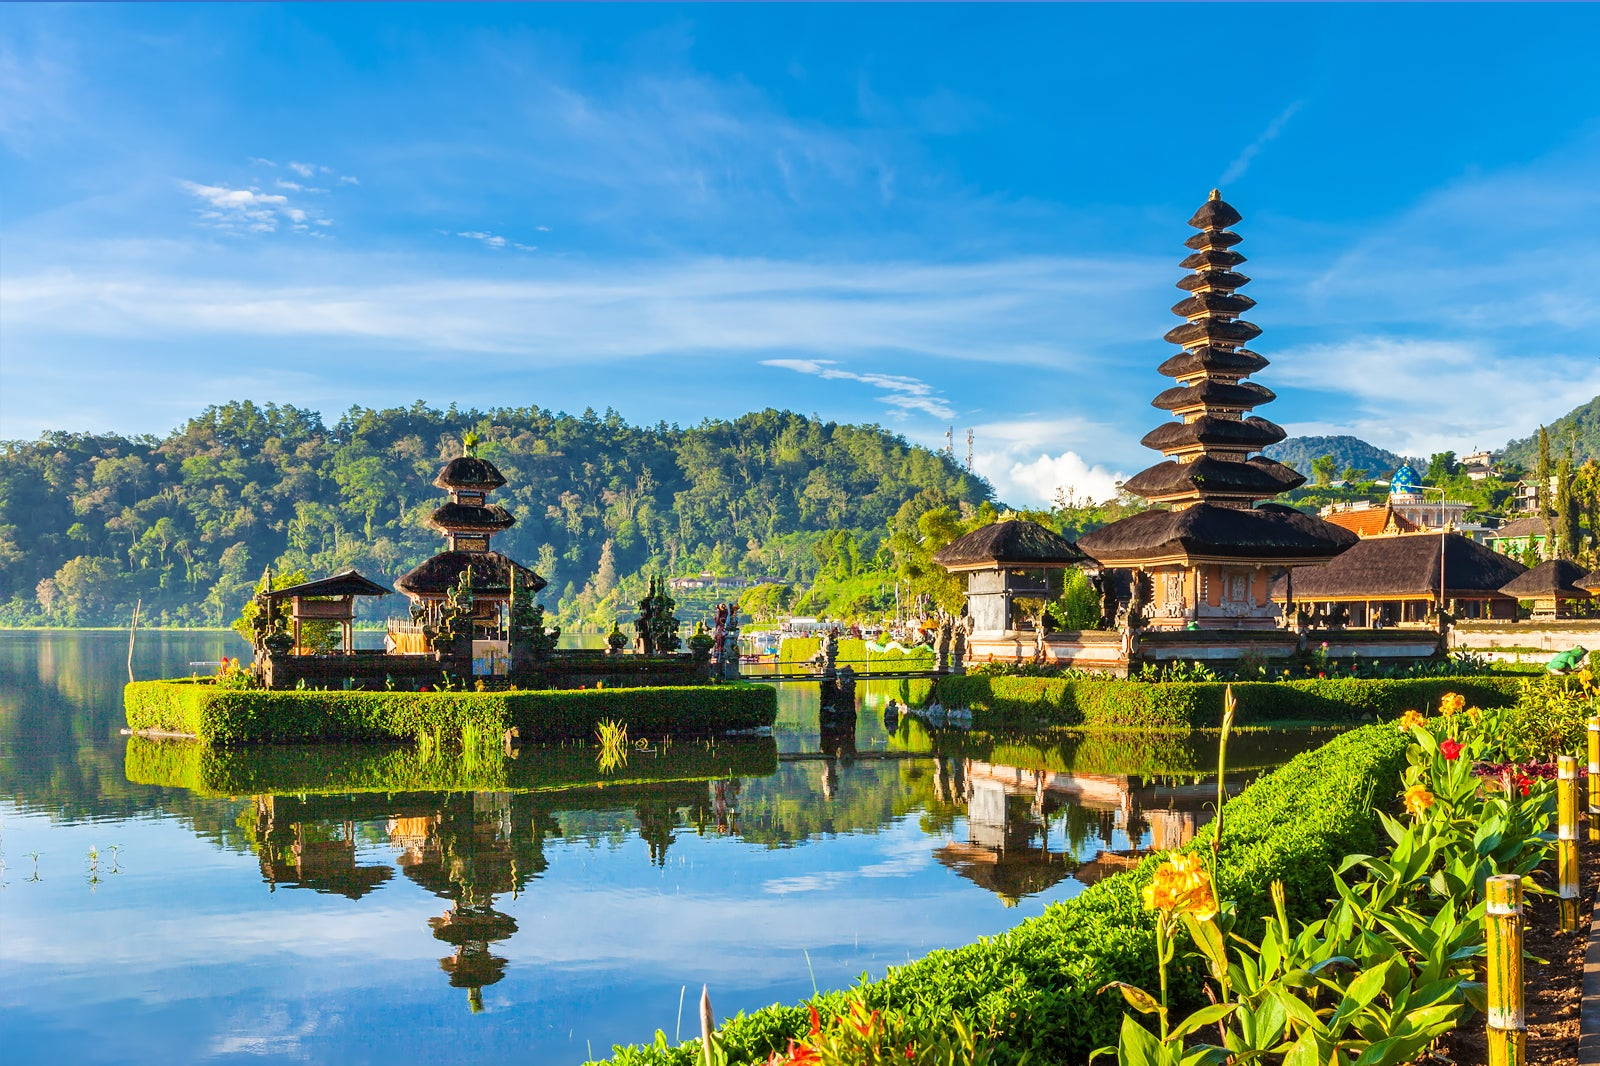 Bali urges foreign tourists